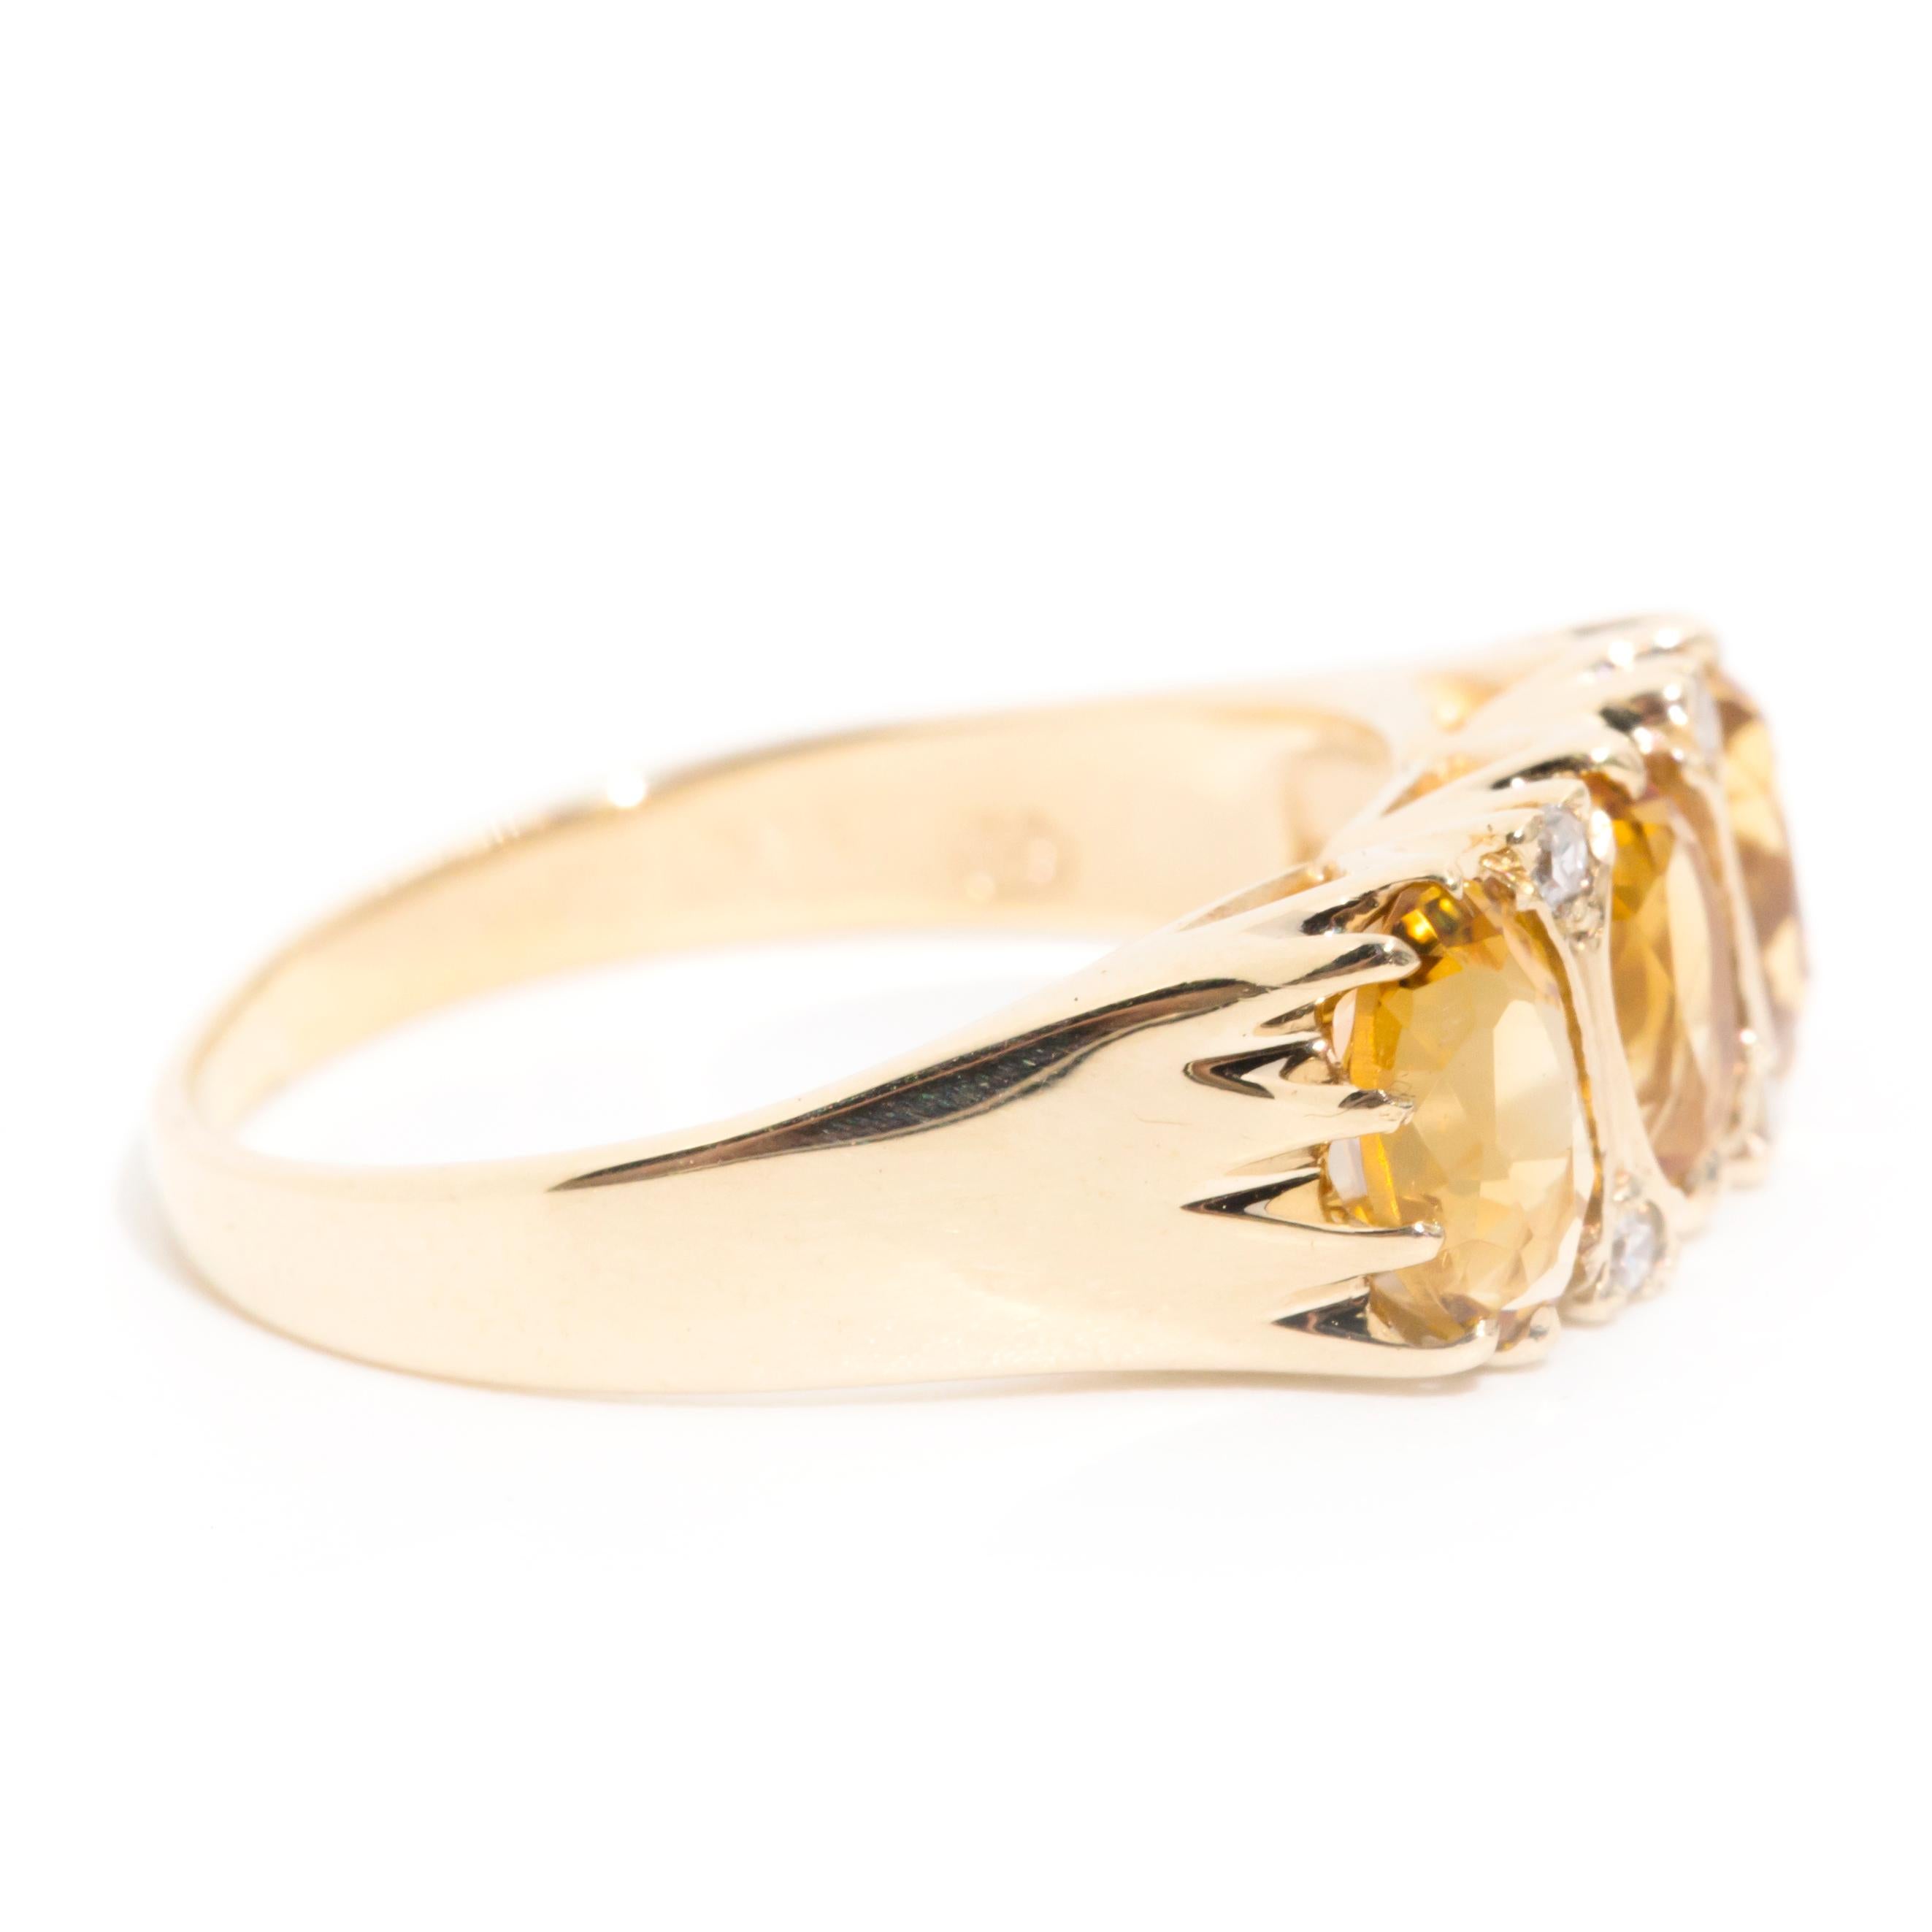 Women's Oval Yellow Citrine and Diamond Vintage Three Stone Ring in 9 Carat Yellow Gold